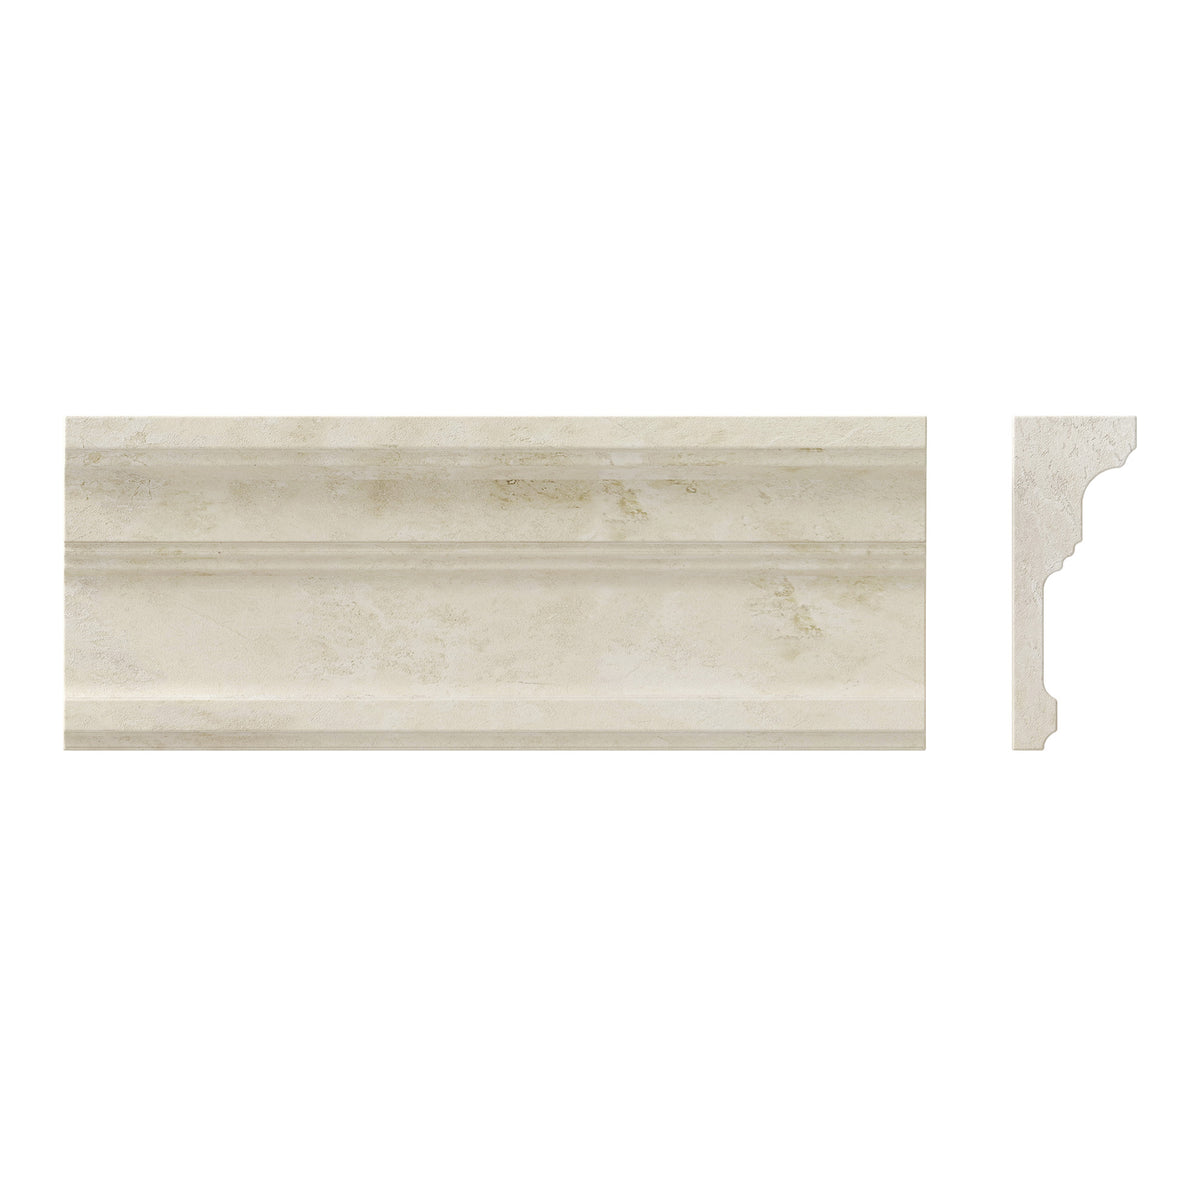 Mediterranean Family Crown Moulding Main Product Slider View